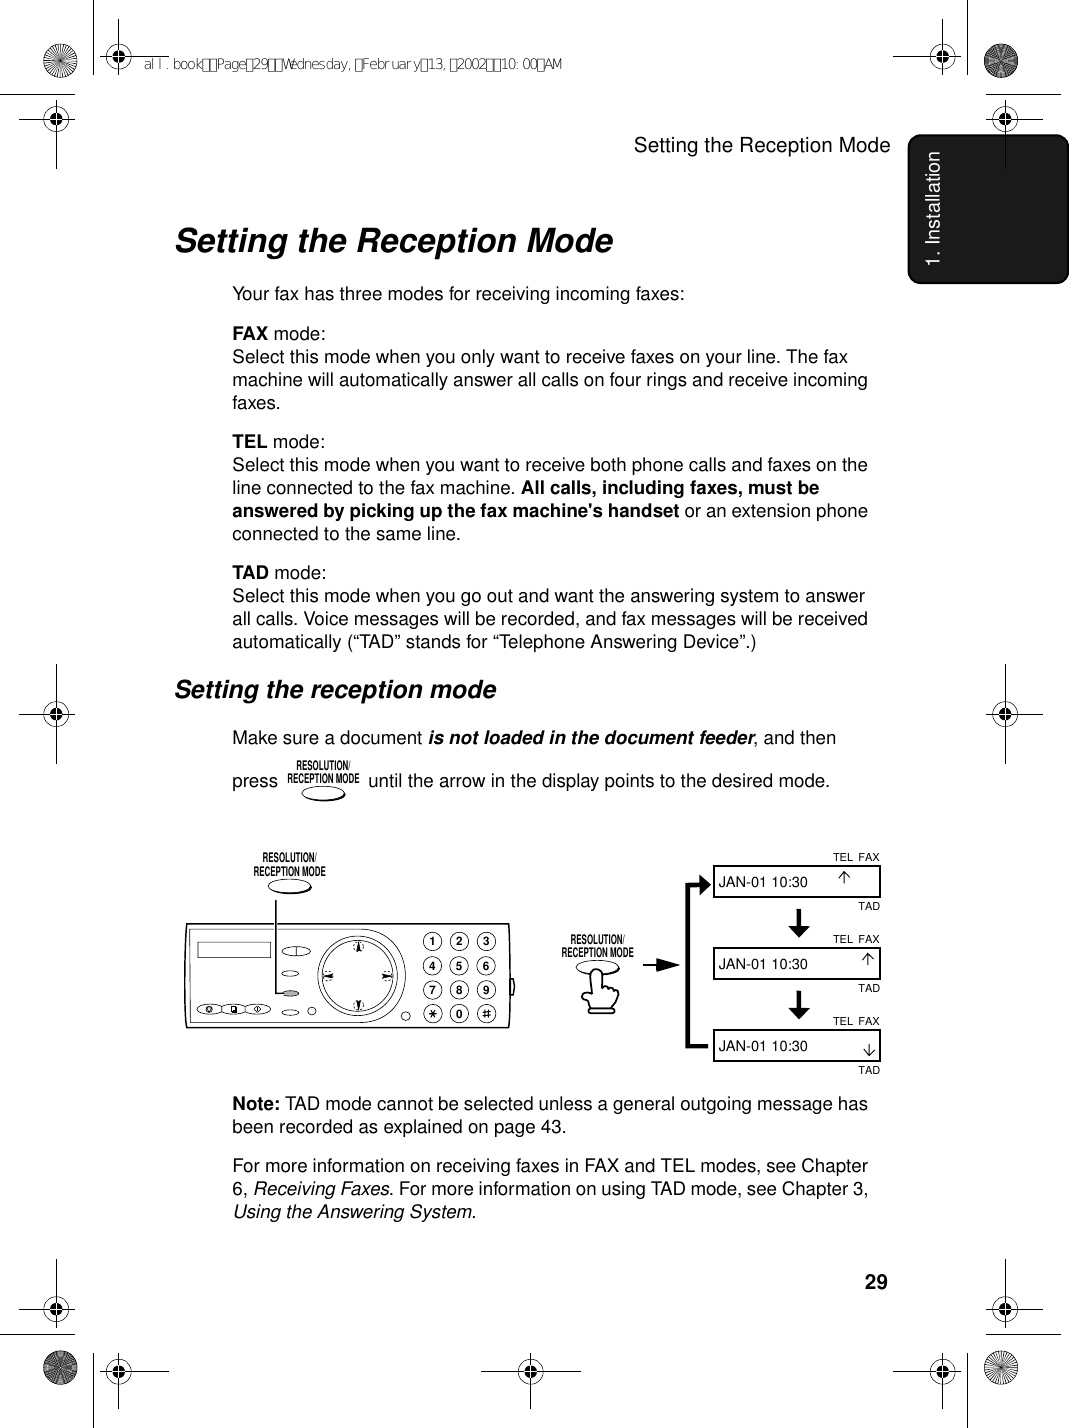 Setting the Reception Mode291. InstallationSetting the Reception ModeYour fax has three modes for receiving incoming faxes:FAX mode:Select this mode when you only want to receive faxes on your line. The fax machine will automatically answer all calls on four rings and receive incoming faxes.TEL mode:Select this mode when you want to receive both phone calls and faxes on the line connected to the fax machine. All calls, including faxes, must be answered by picking up the fax machine&apos;s handset or an extension phone connected to the same line.TAD mode:Select this mode when you go out and want the answering system to answer all calls. Voice messages will be recorded, and fax messages will be received automatically (“TAD” stands for “Telephone Answering Device”.)Setting the reception modeMake sure a document is not loaded in the document feeder, and then press   until the arrow in the display points to the desired mode.RESOLUTION/RECEPTION MODENote: TAD mode cannot be selected unless a general outgoing message has been recorded as explained on page 43.For more information on receiving faxes in FAX and TEL modes, see Chapter 6, Receiving Faxes. For more information on using TAD mode, see Chapter 3, Using the Answering System.FAXTELJAN-01 10:30FAXTELJAN-01 10:30FAXTELJAN-01 10:30TADTADTAD1945 67802 3RESOLUTION/RECEPTION MODERESOLUTION/RECEPTION MODEall.bookPage29Wednesday,February13,200210:00AM